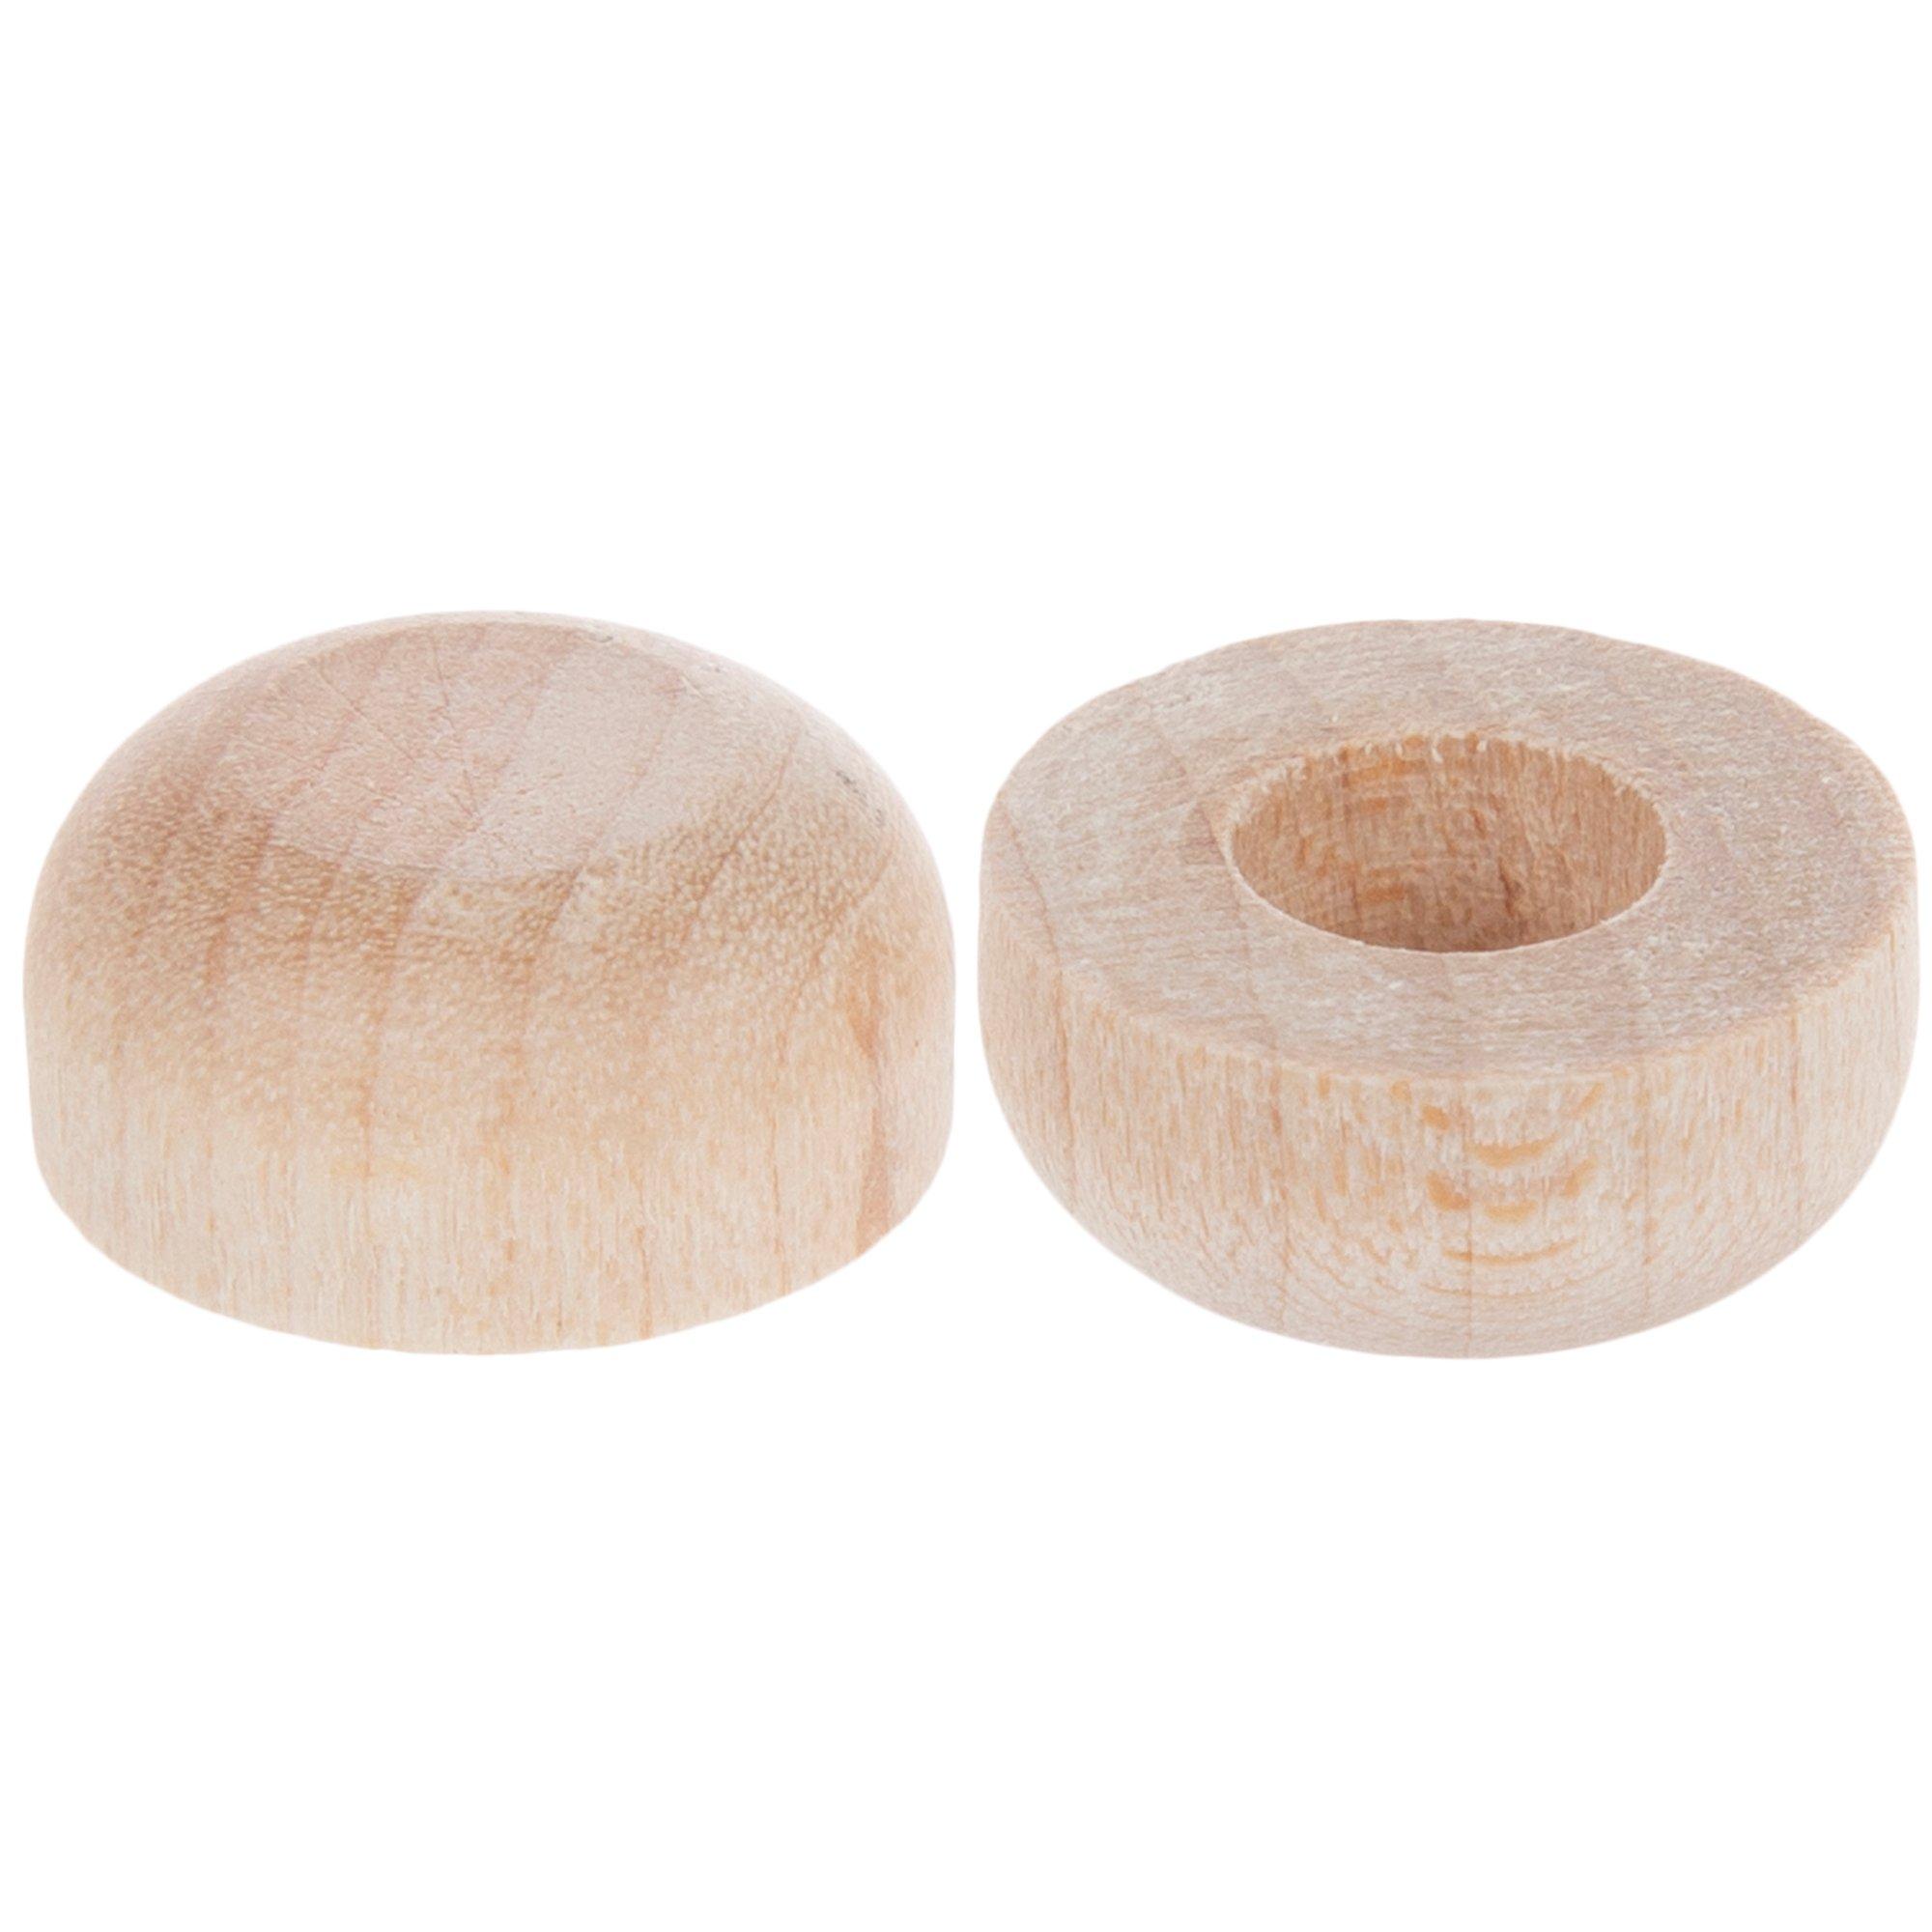 Hello Hobby Wooden Craft Dowels, 40 Pieces